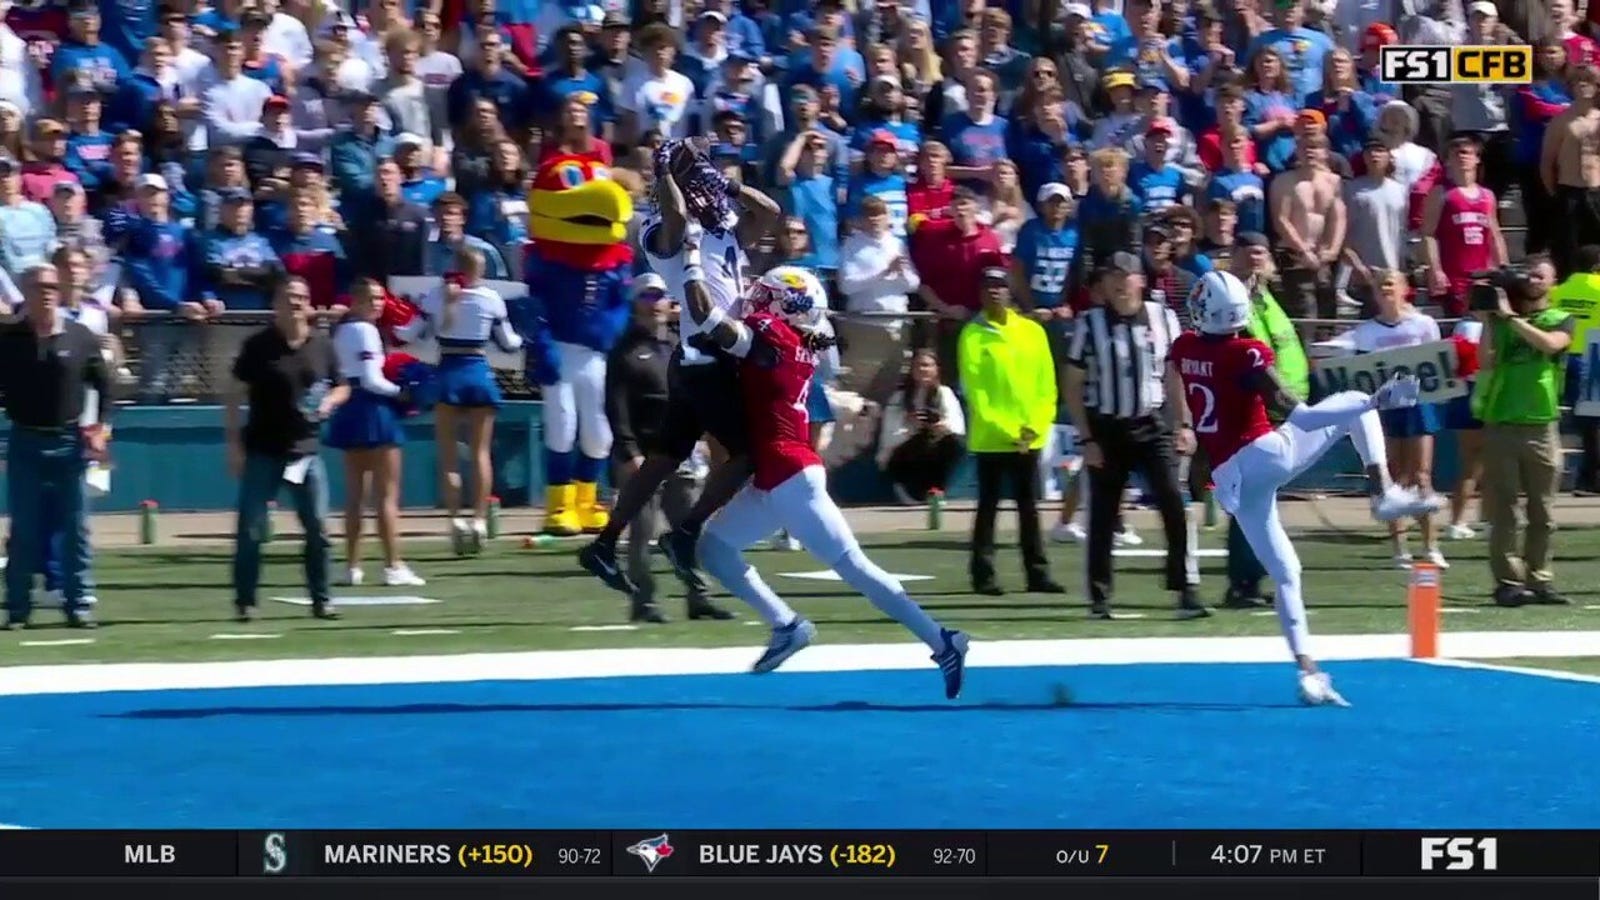 Taye Barber Mosses scores Kansas DB with a stunning touchdown catch to put TCU up 31-24